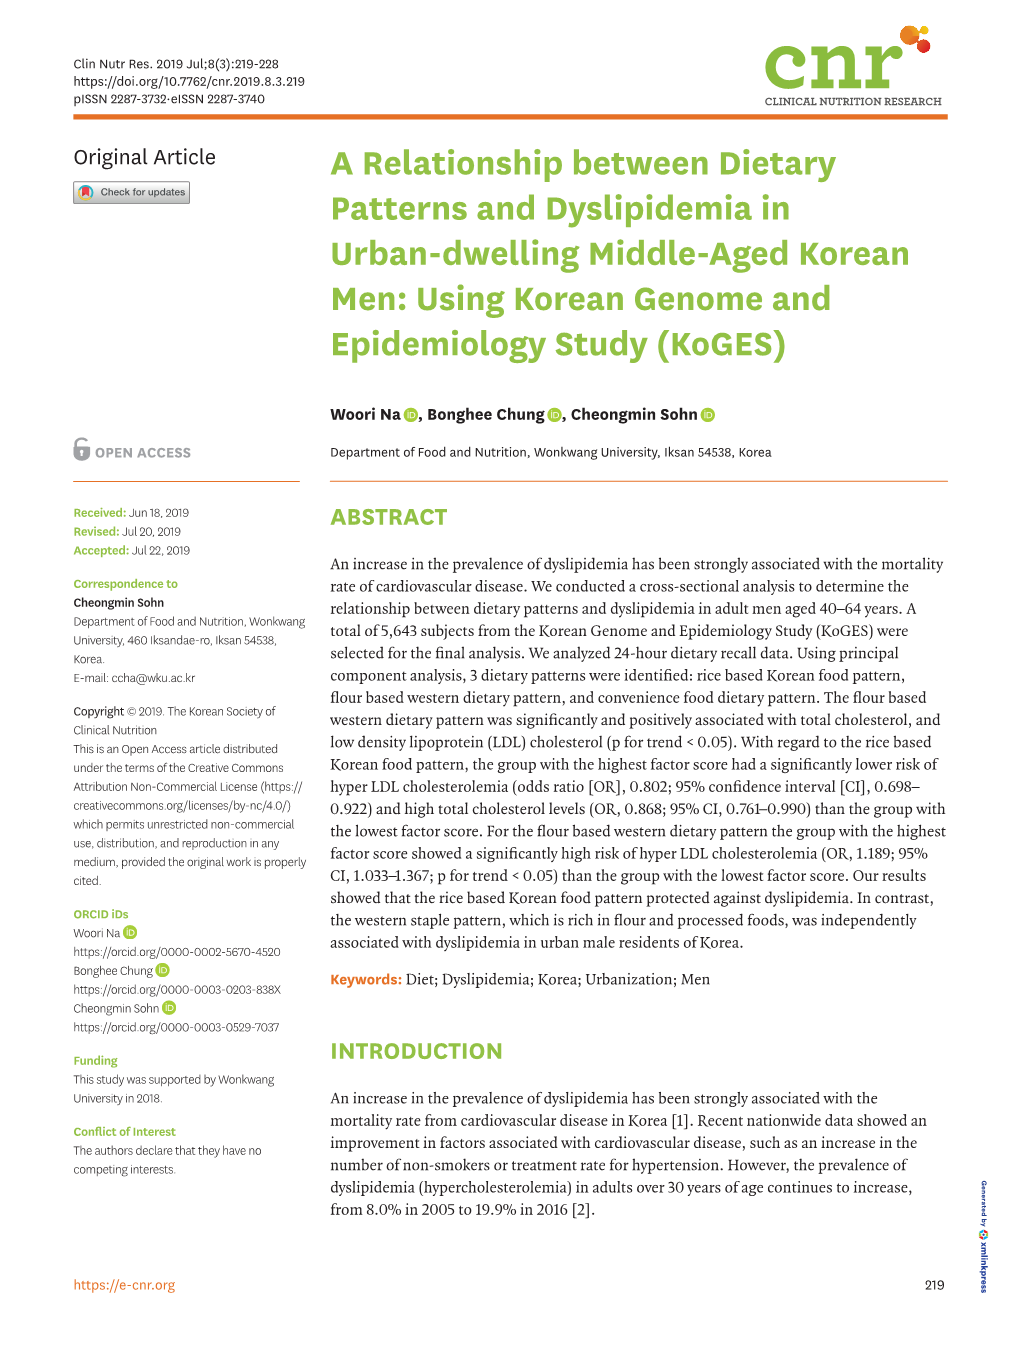 A Relationship Between Dietary Patterns and Dyslipidemia in Urban-Dwelling Middle-Aged Korean Men: Using Korean Genome and Epidemiology Study (Koges)